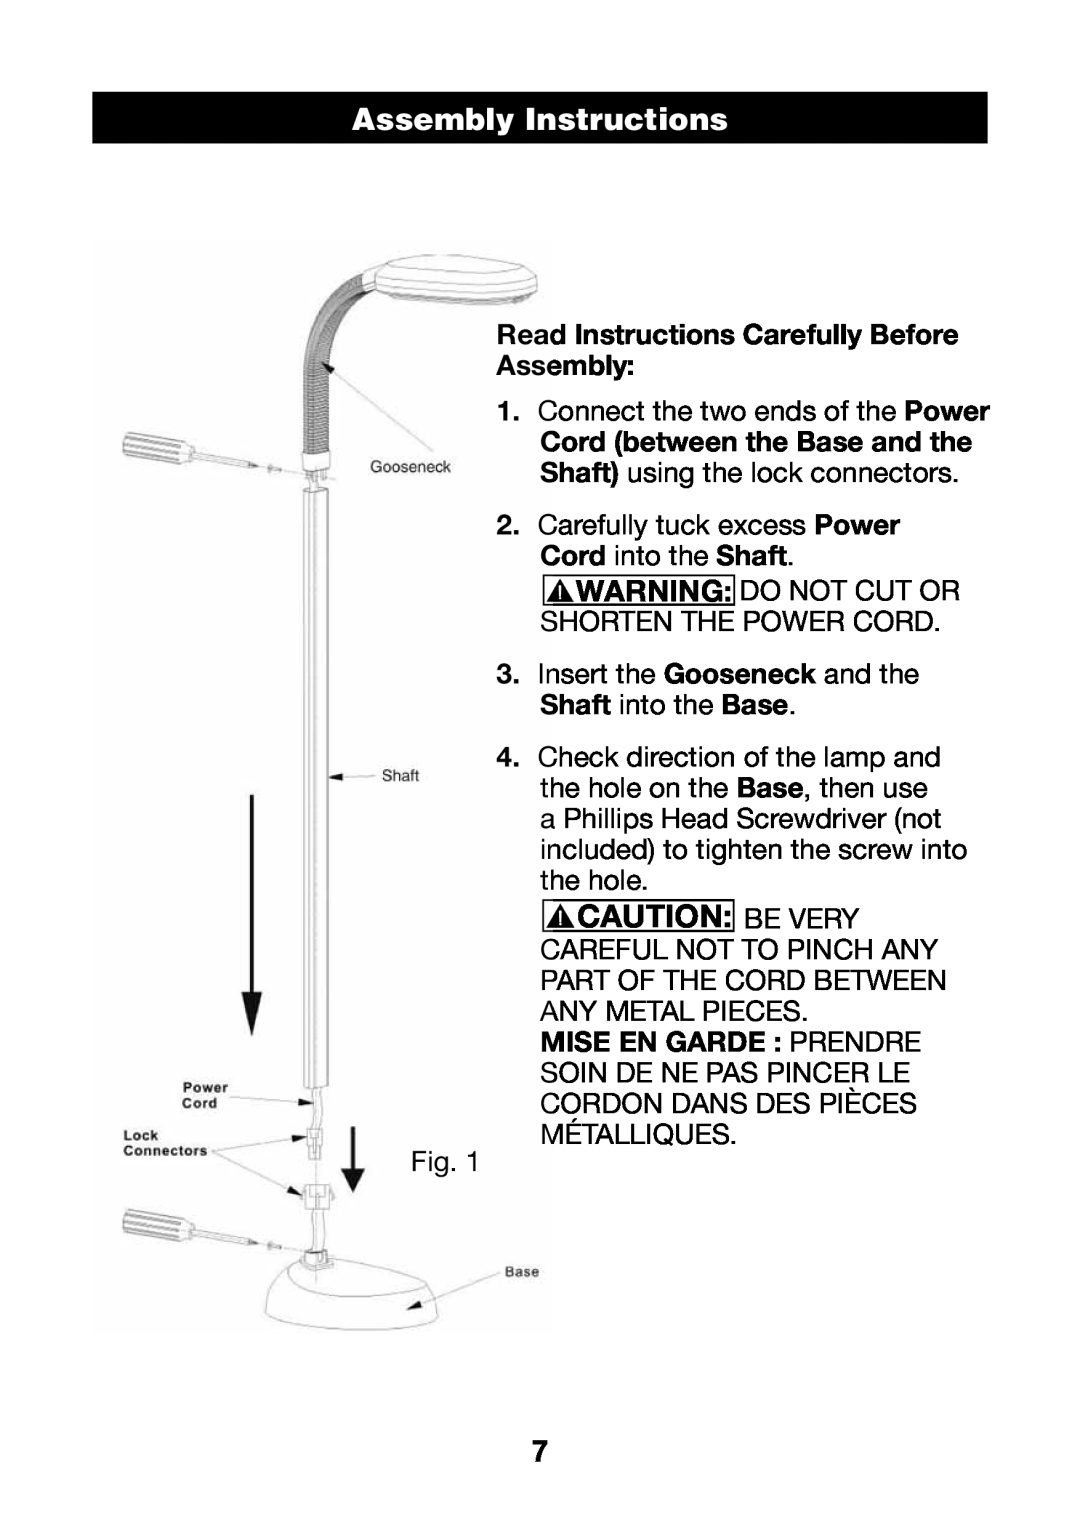 Verilux VF01 manual Assembly Instructions, Read Instructions Carefully Before Assembly, Mise En Garde Prendre 